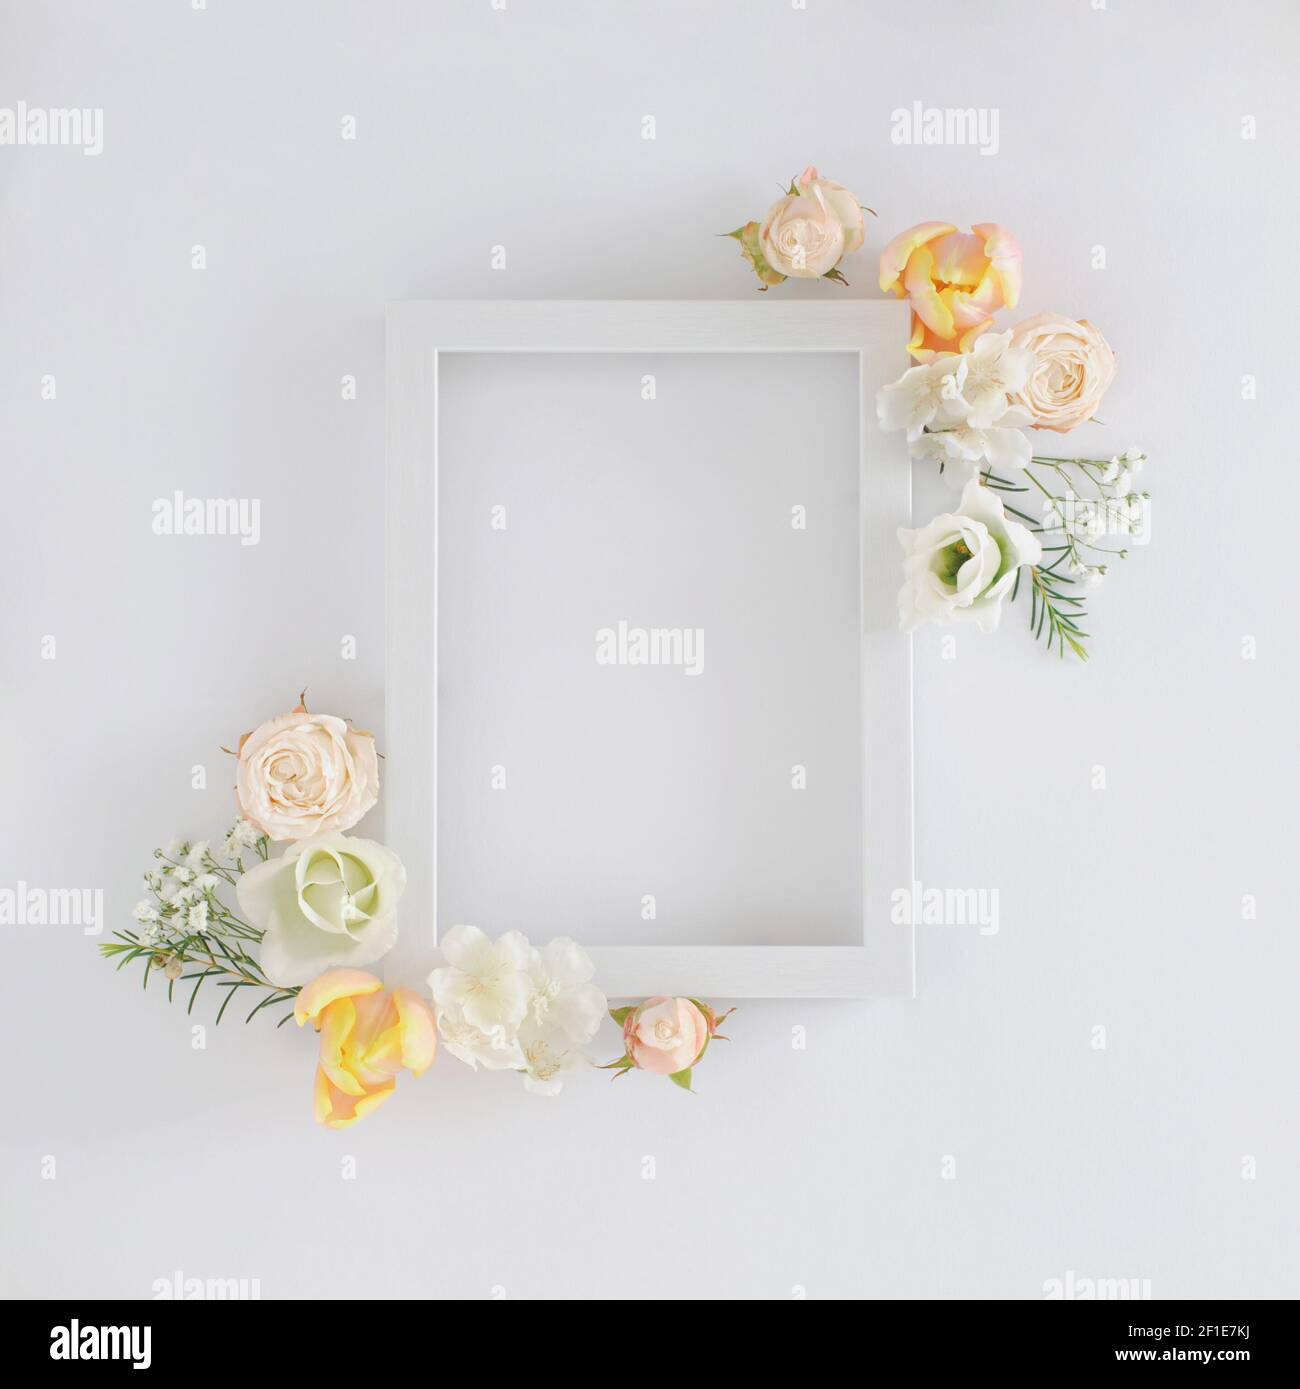 Creative layout made with colorful spring flowers and white frame over white background. Minimal flat lay holiday concept. Stock Photo